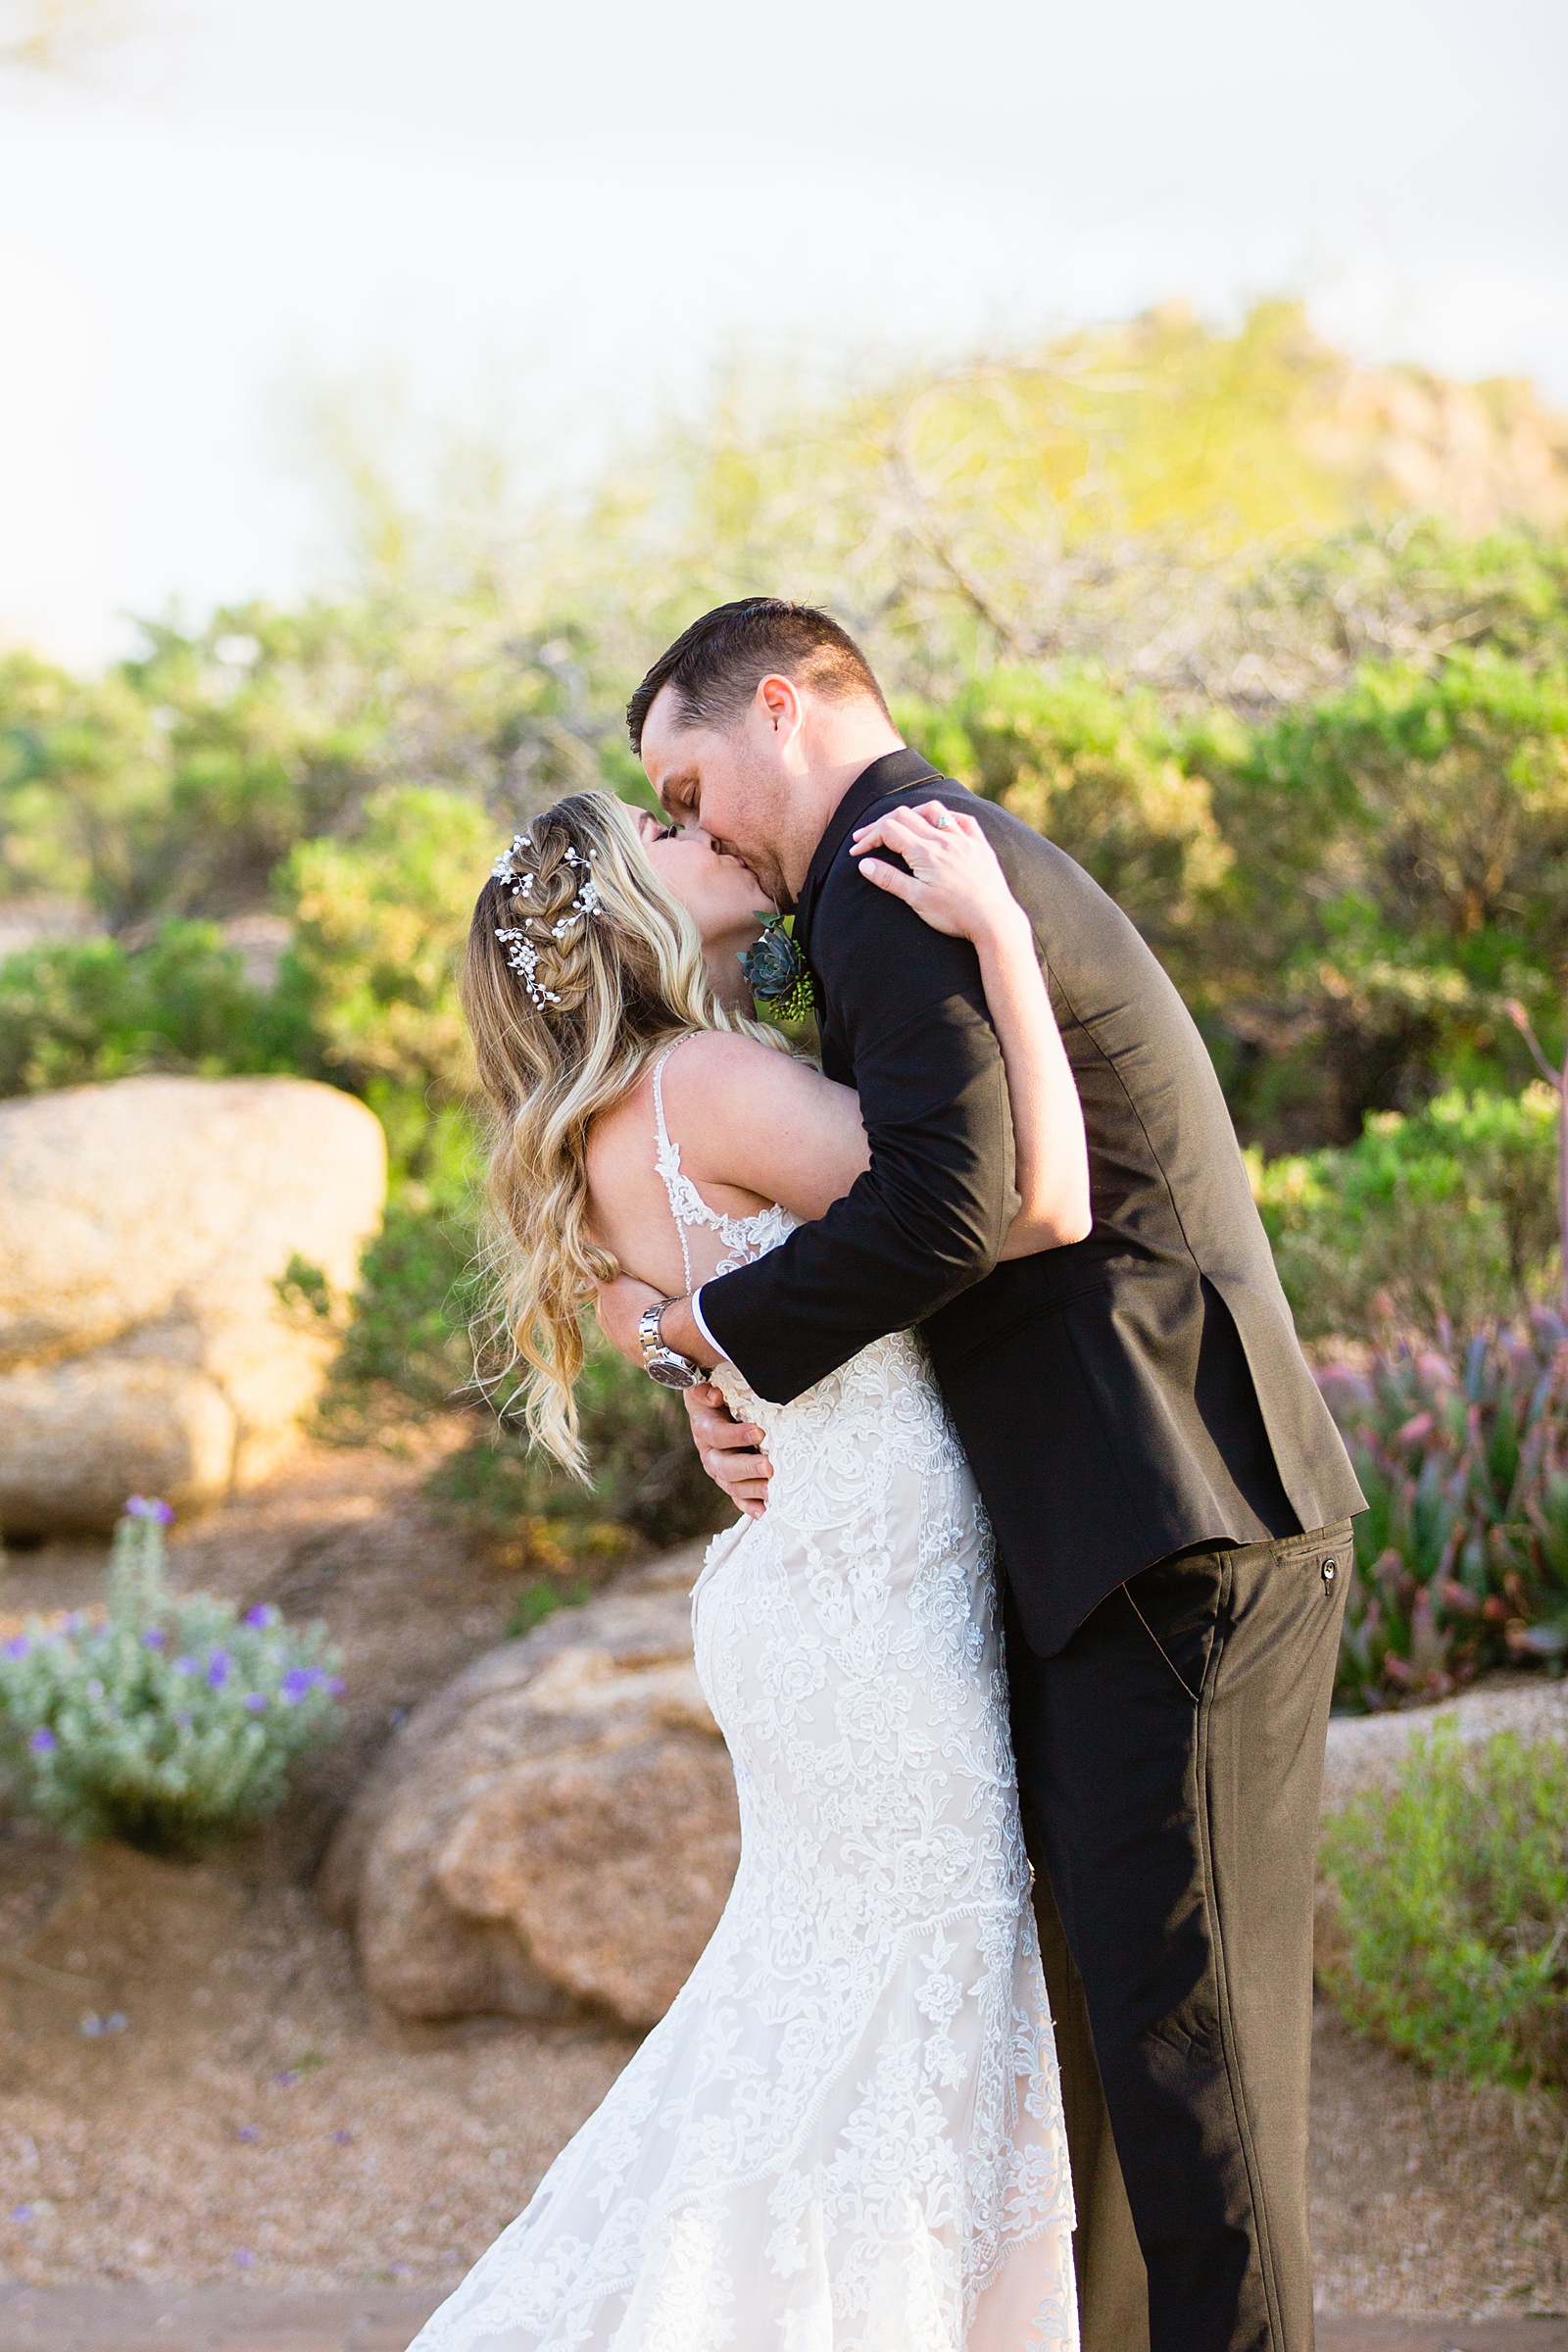 Bride and groom share their first kiss during their wedding ceremony at Troon North by Arizona wedding photographer PMA Photography.